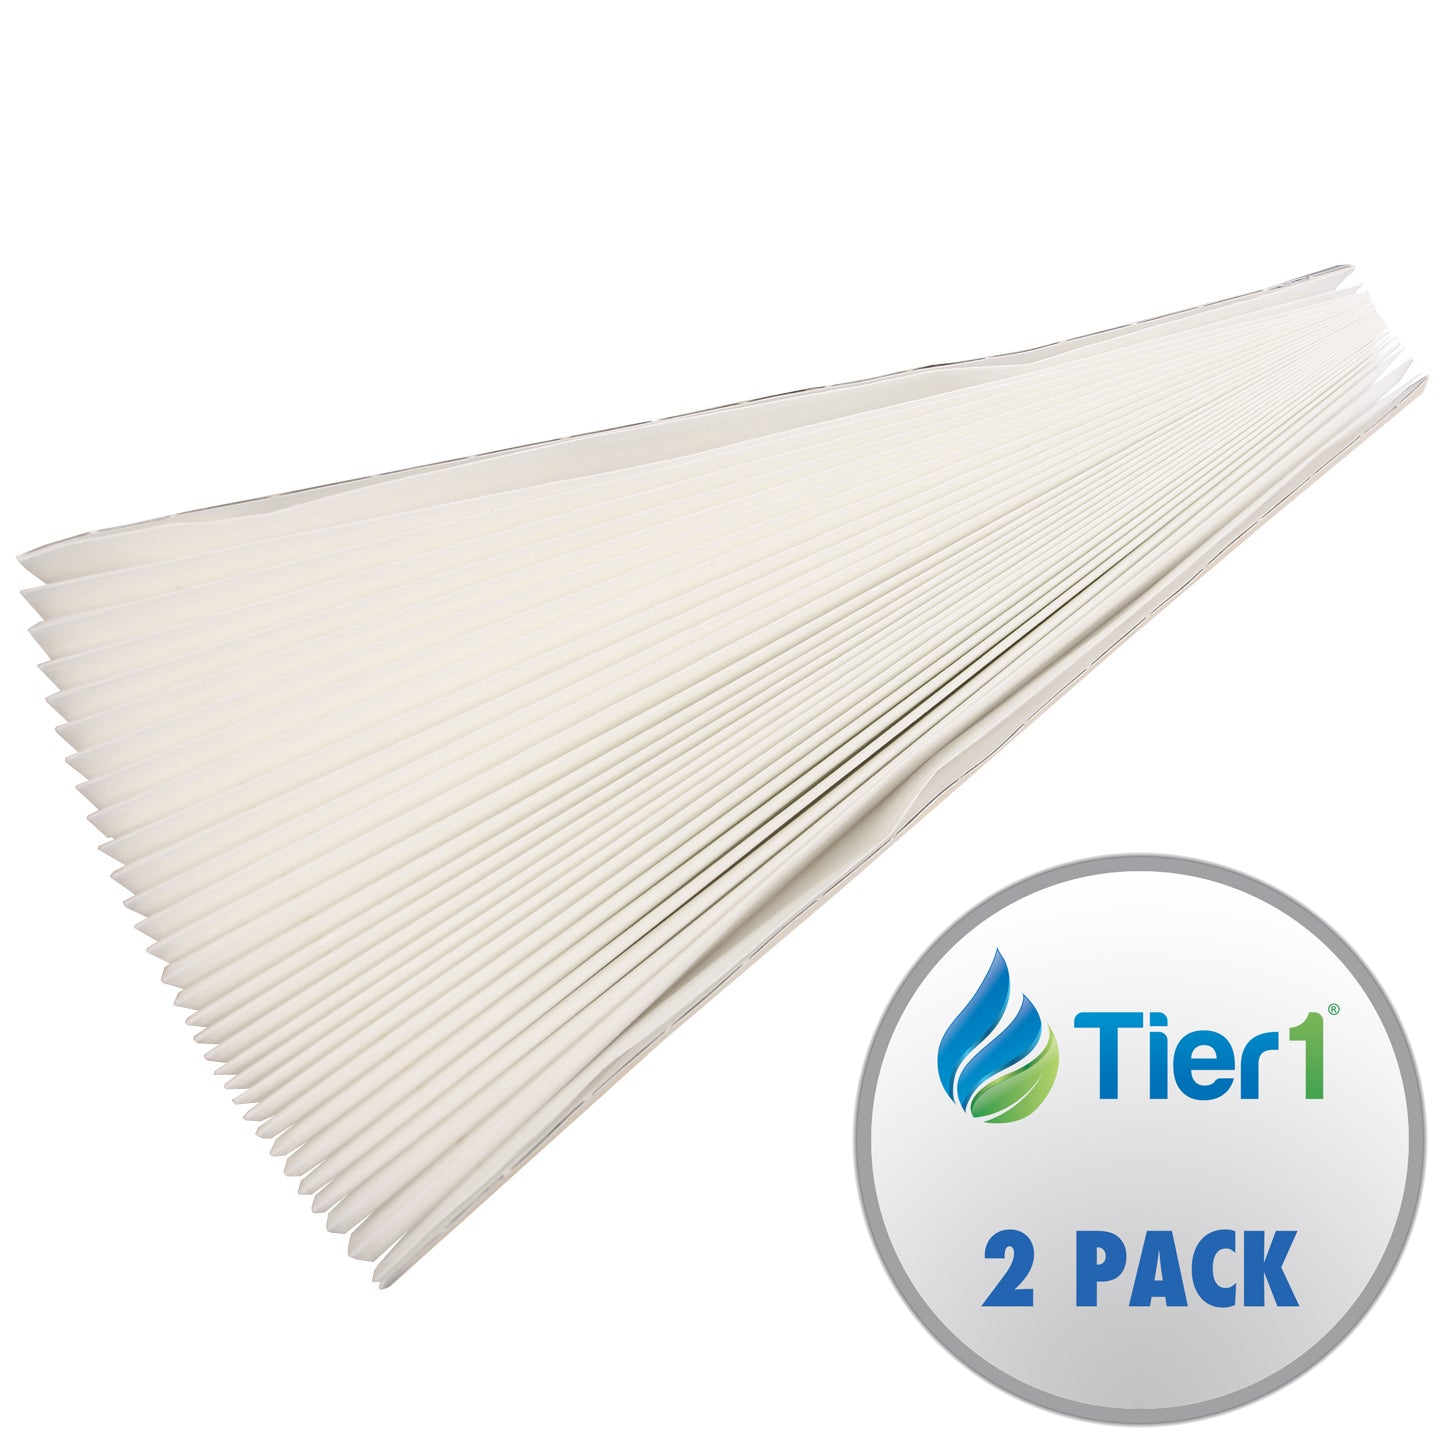 Air Filter 201 Aprilaire Comparable Replacement Filter by Tier1 (2-Pack)